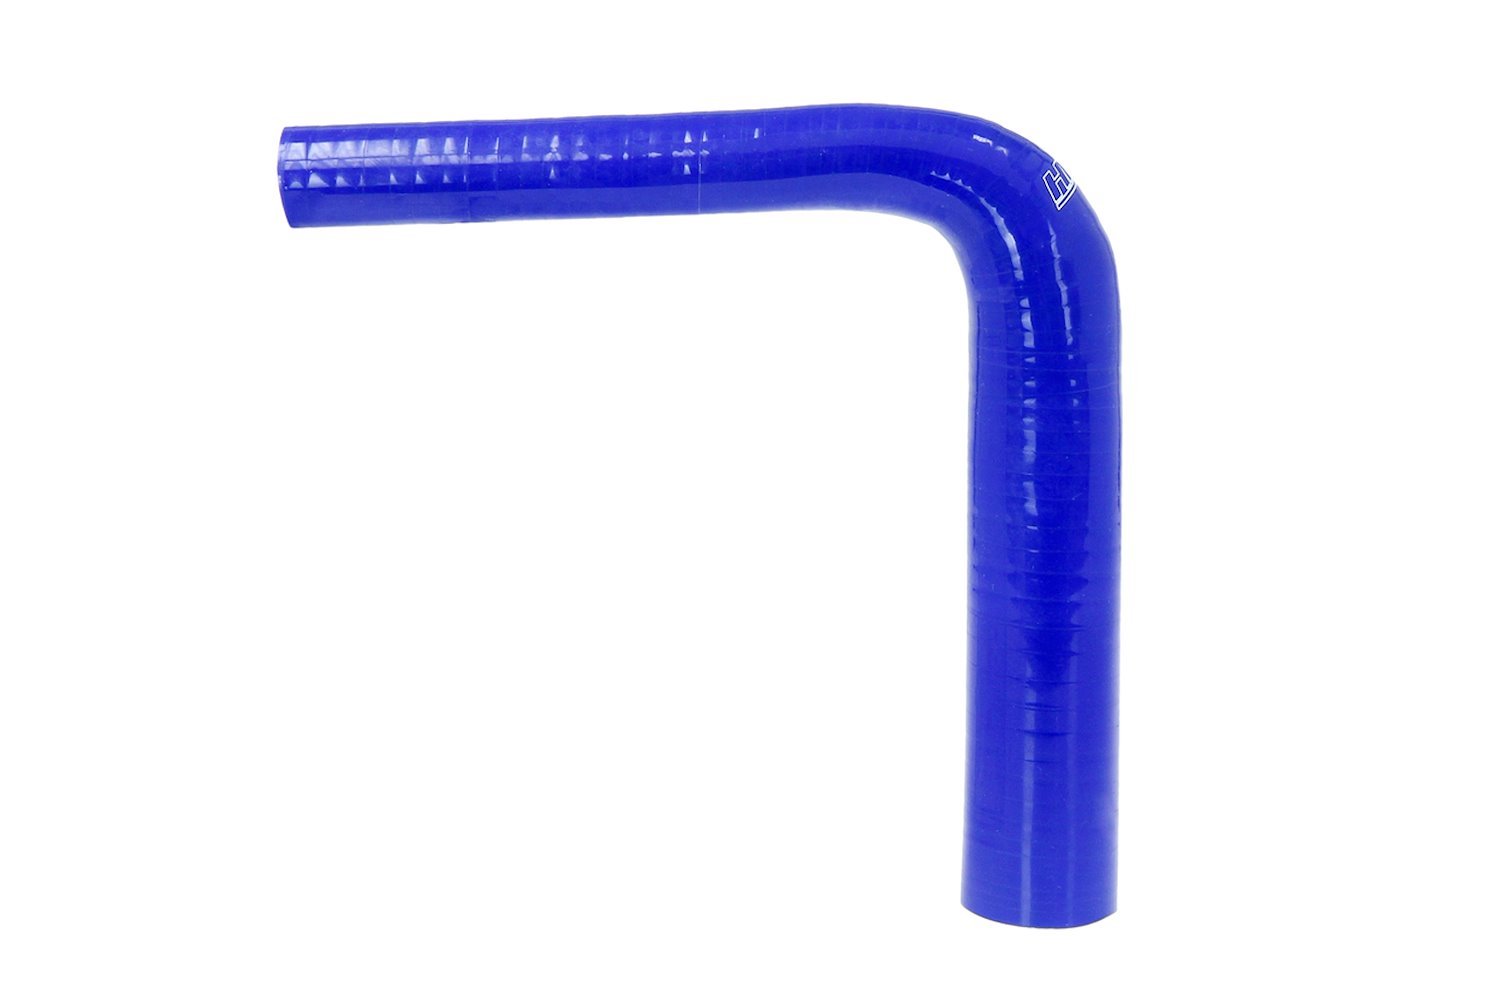 HTSER90-075-100-BLUE Silicone 90-Degree Elbow Hose, High-Temp 4-Ply Reinforced, 3/4 in. - 1 in. ID, Blue